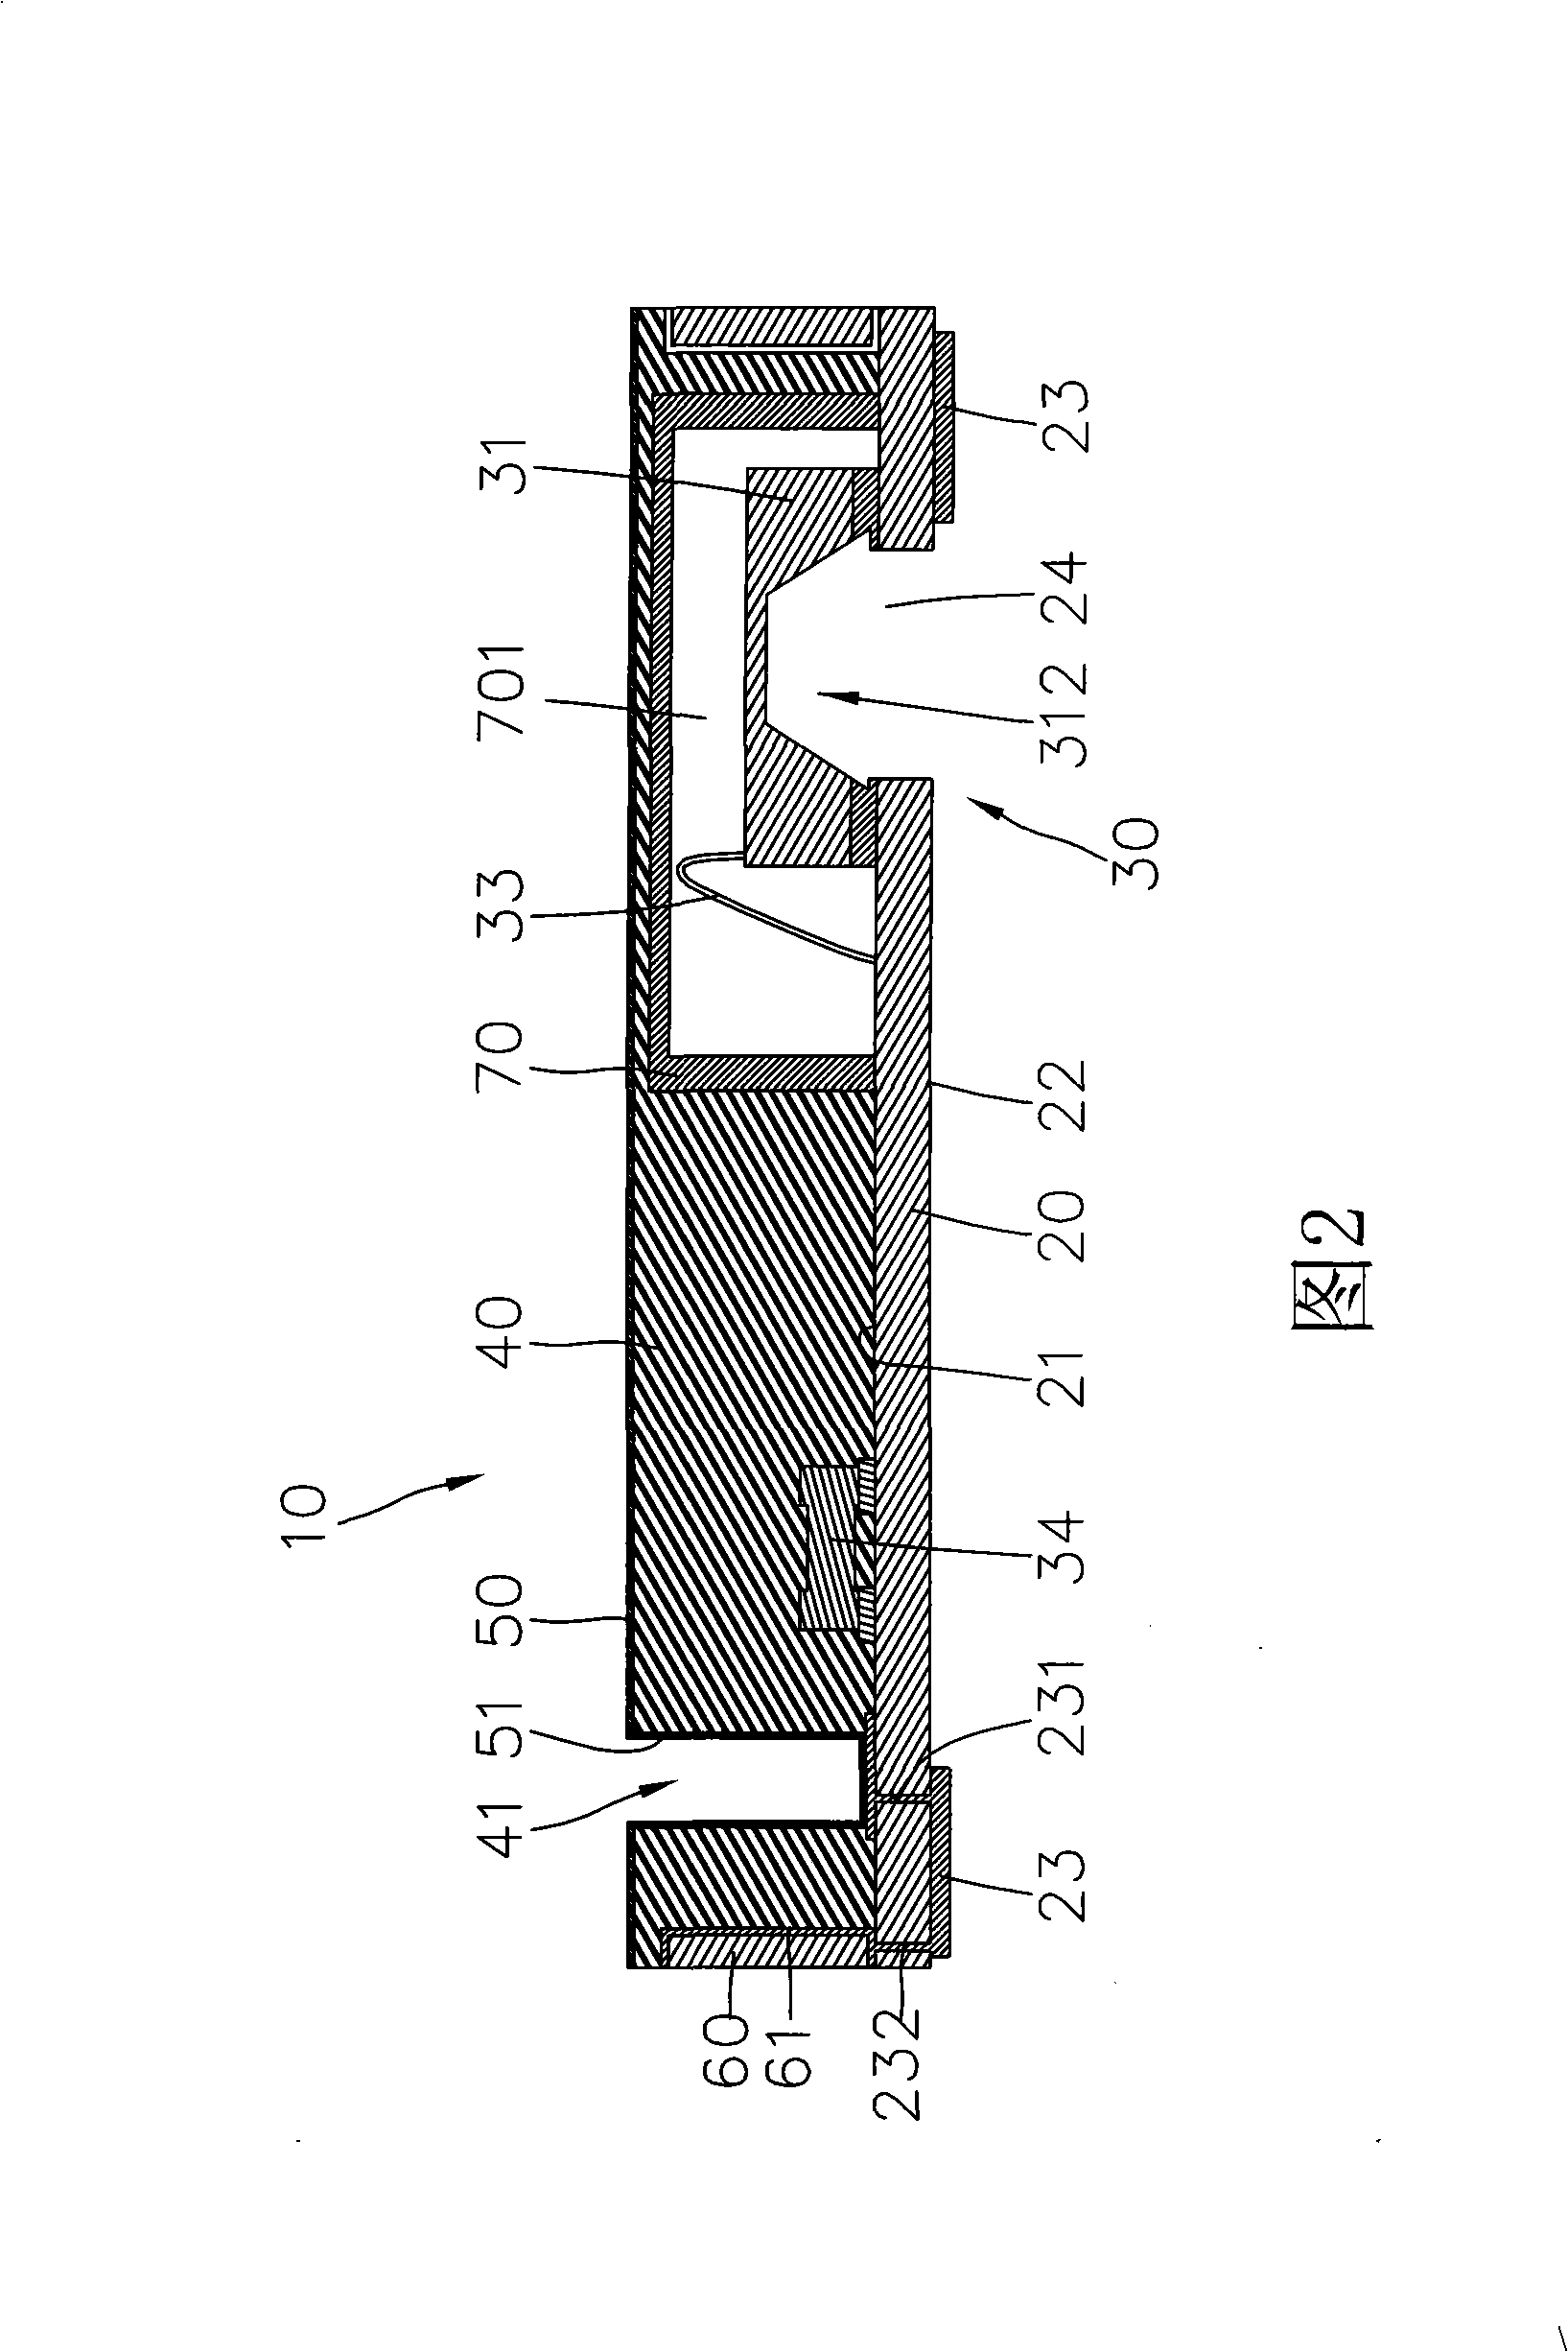 Encapsulation construction for silicon crystal microphone